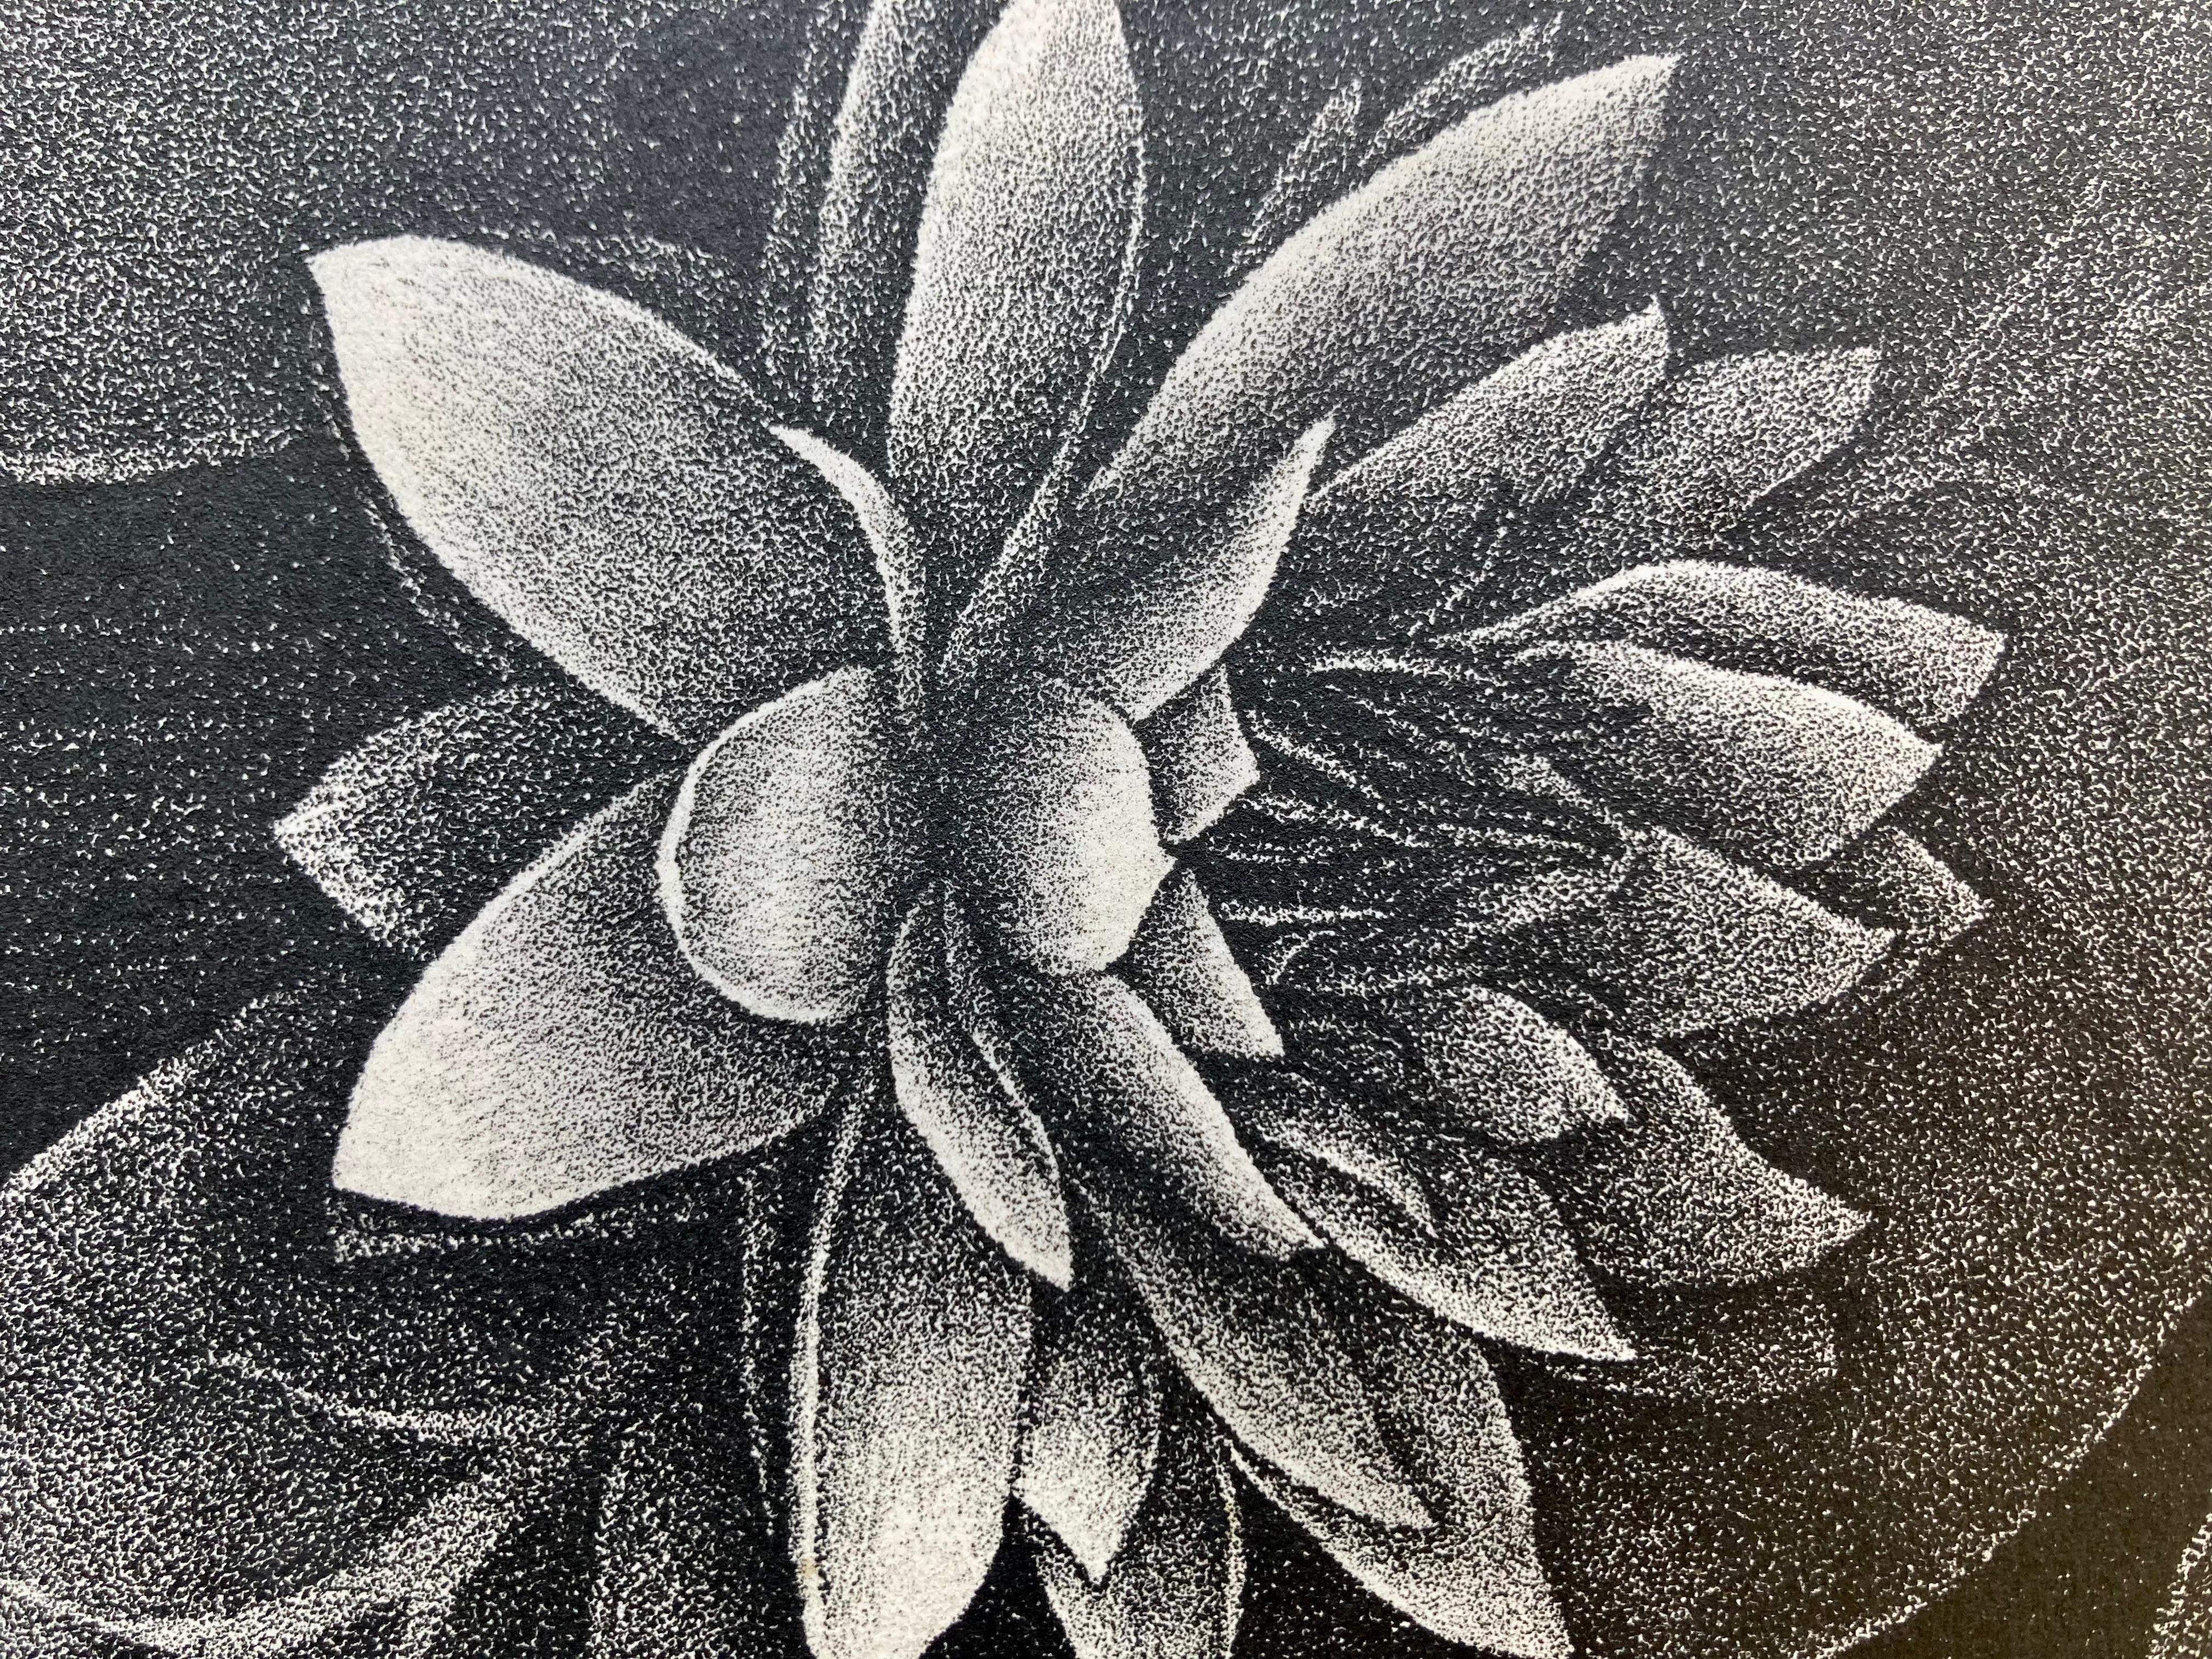 HENRIETTA SHORE (1880 -1963)

WATER LILY c. 1928
Lithograph, signed and titled in pencil and with the pencil cypher of printer Lynton Kistler (K). Image 7 x 6 1/8, full margins, sheet 12 ½ x 9 ½” # 20 is likely the edition size. # 18 in lower left